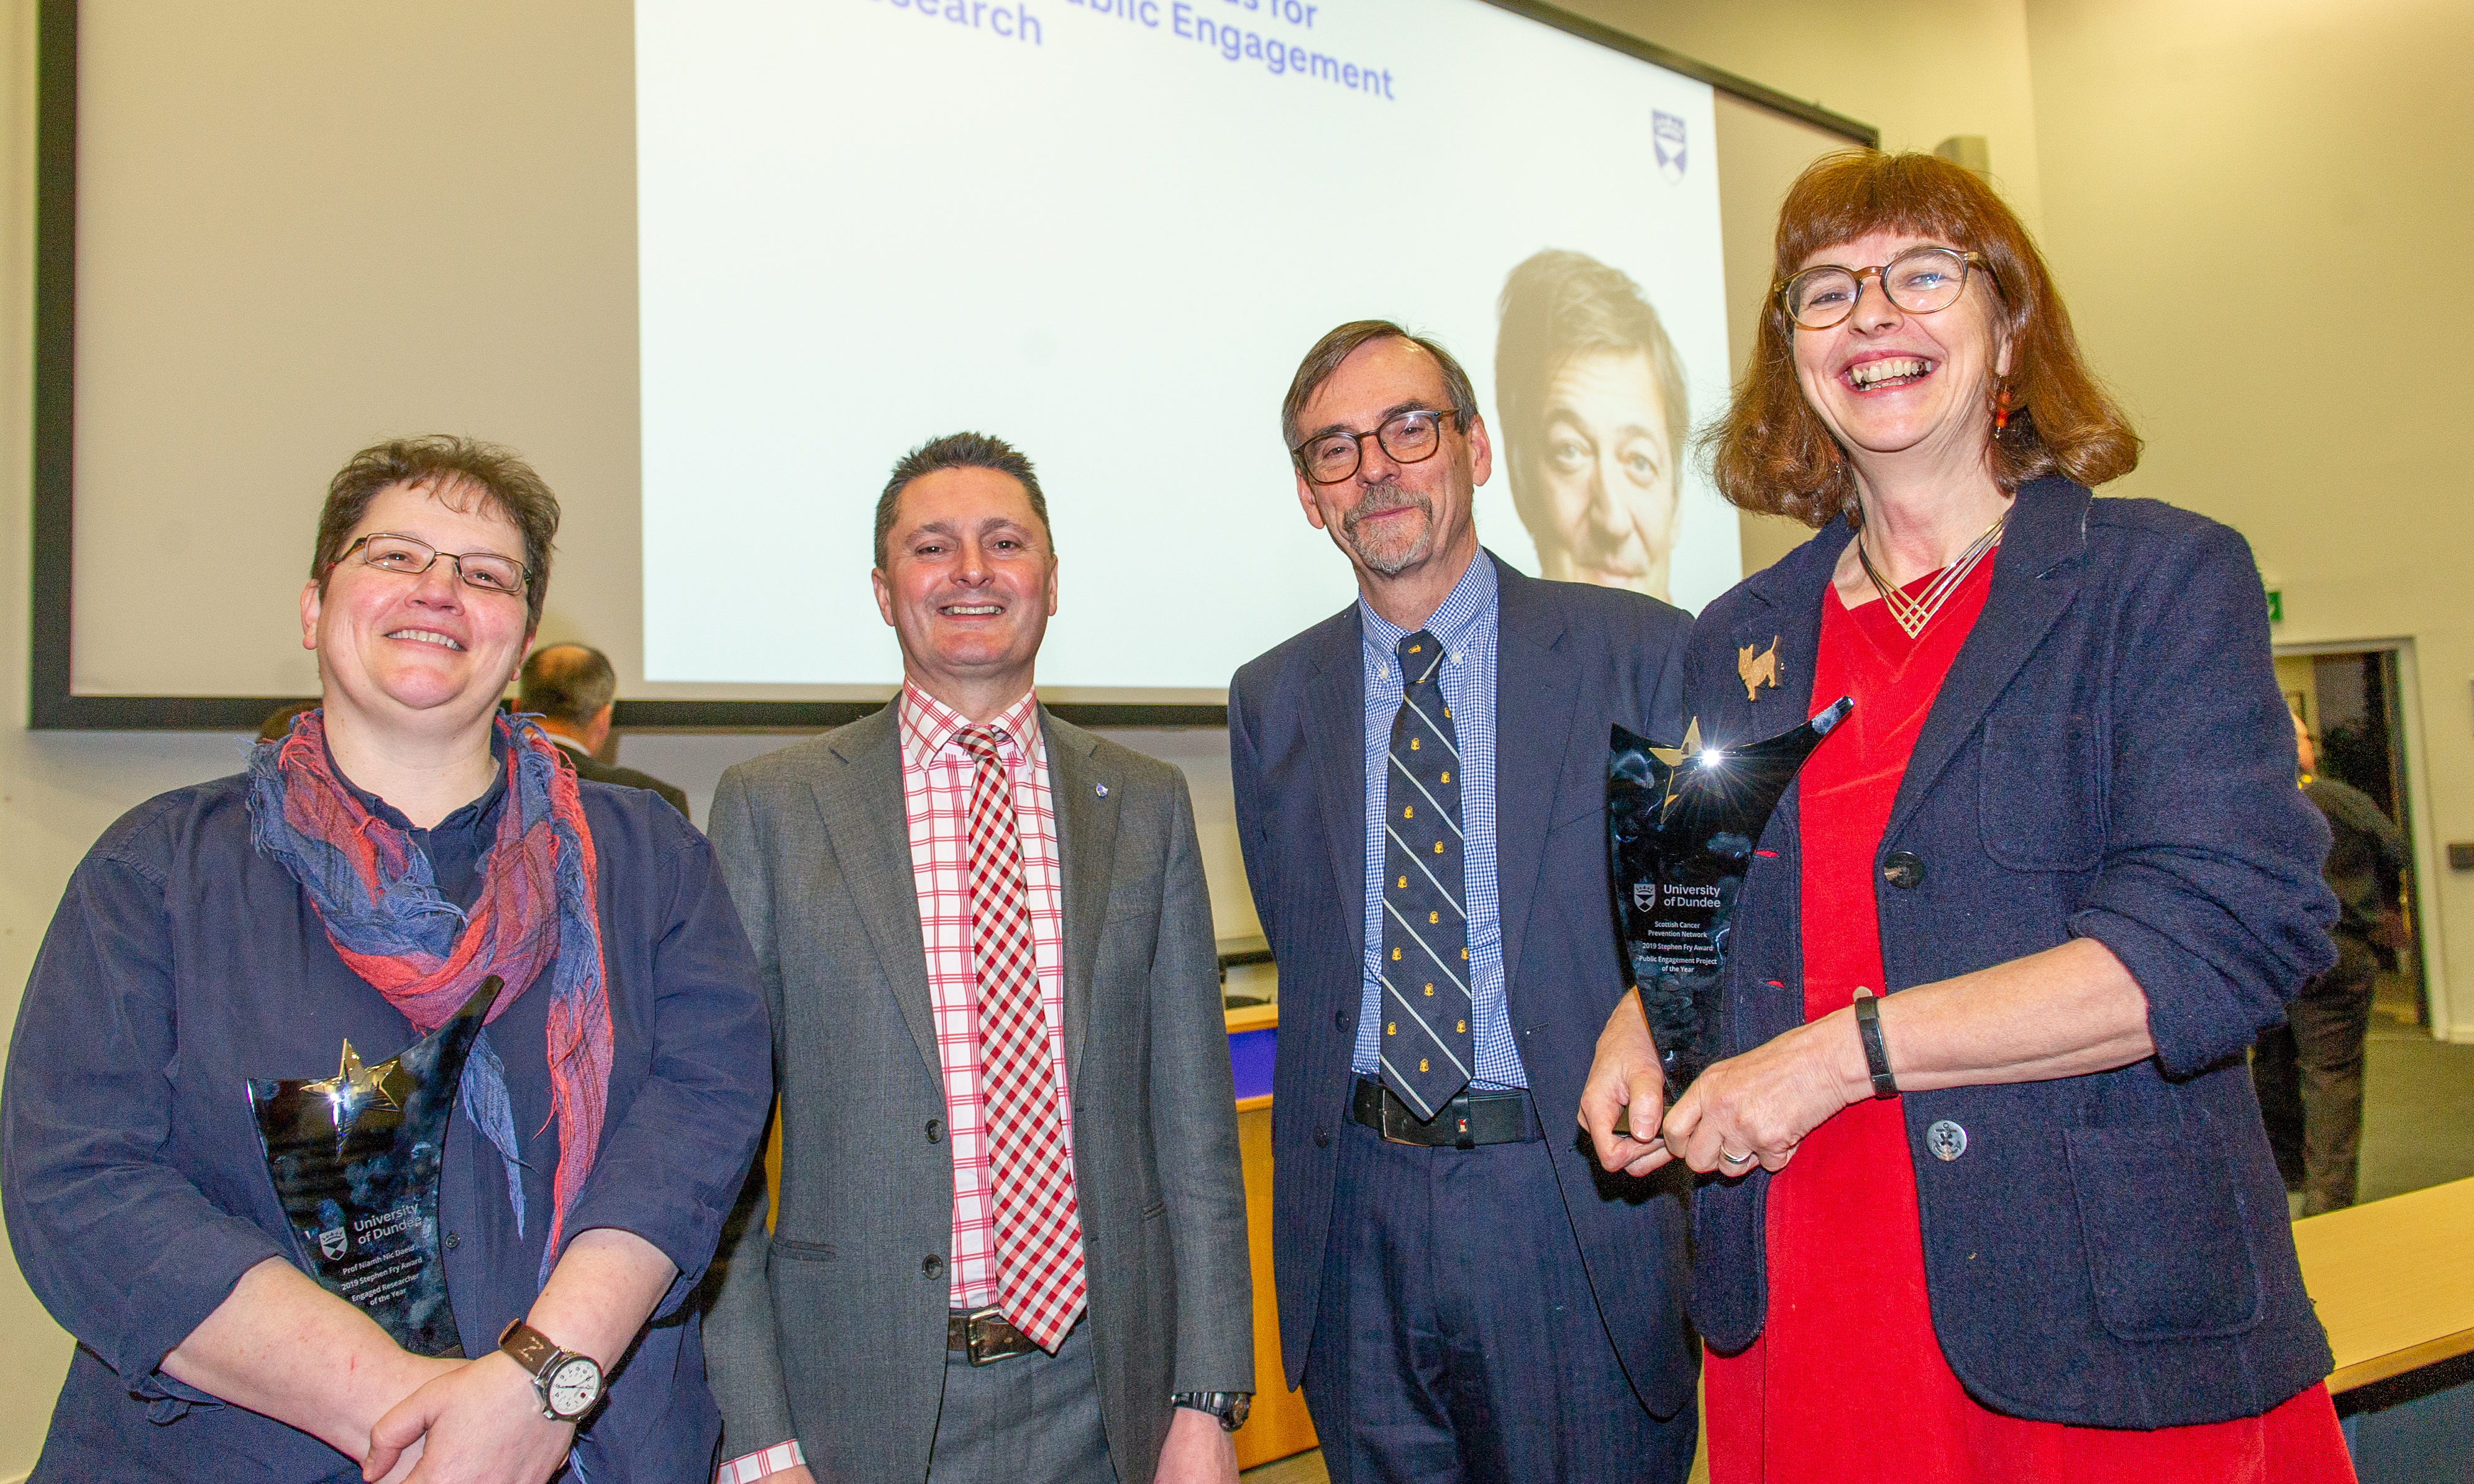 Professor Niamh Nic Daéid (Engaged Researcher of the Year), Professor Andrew Atherton (Principal & Vice-Chancellor Dundee University), Professors Bob Steele and Annie Anderson (Public Engagement Project of the Year), Dundee University, Dalhousie Building, Hawkhill, Dundee.